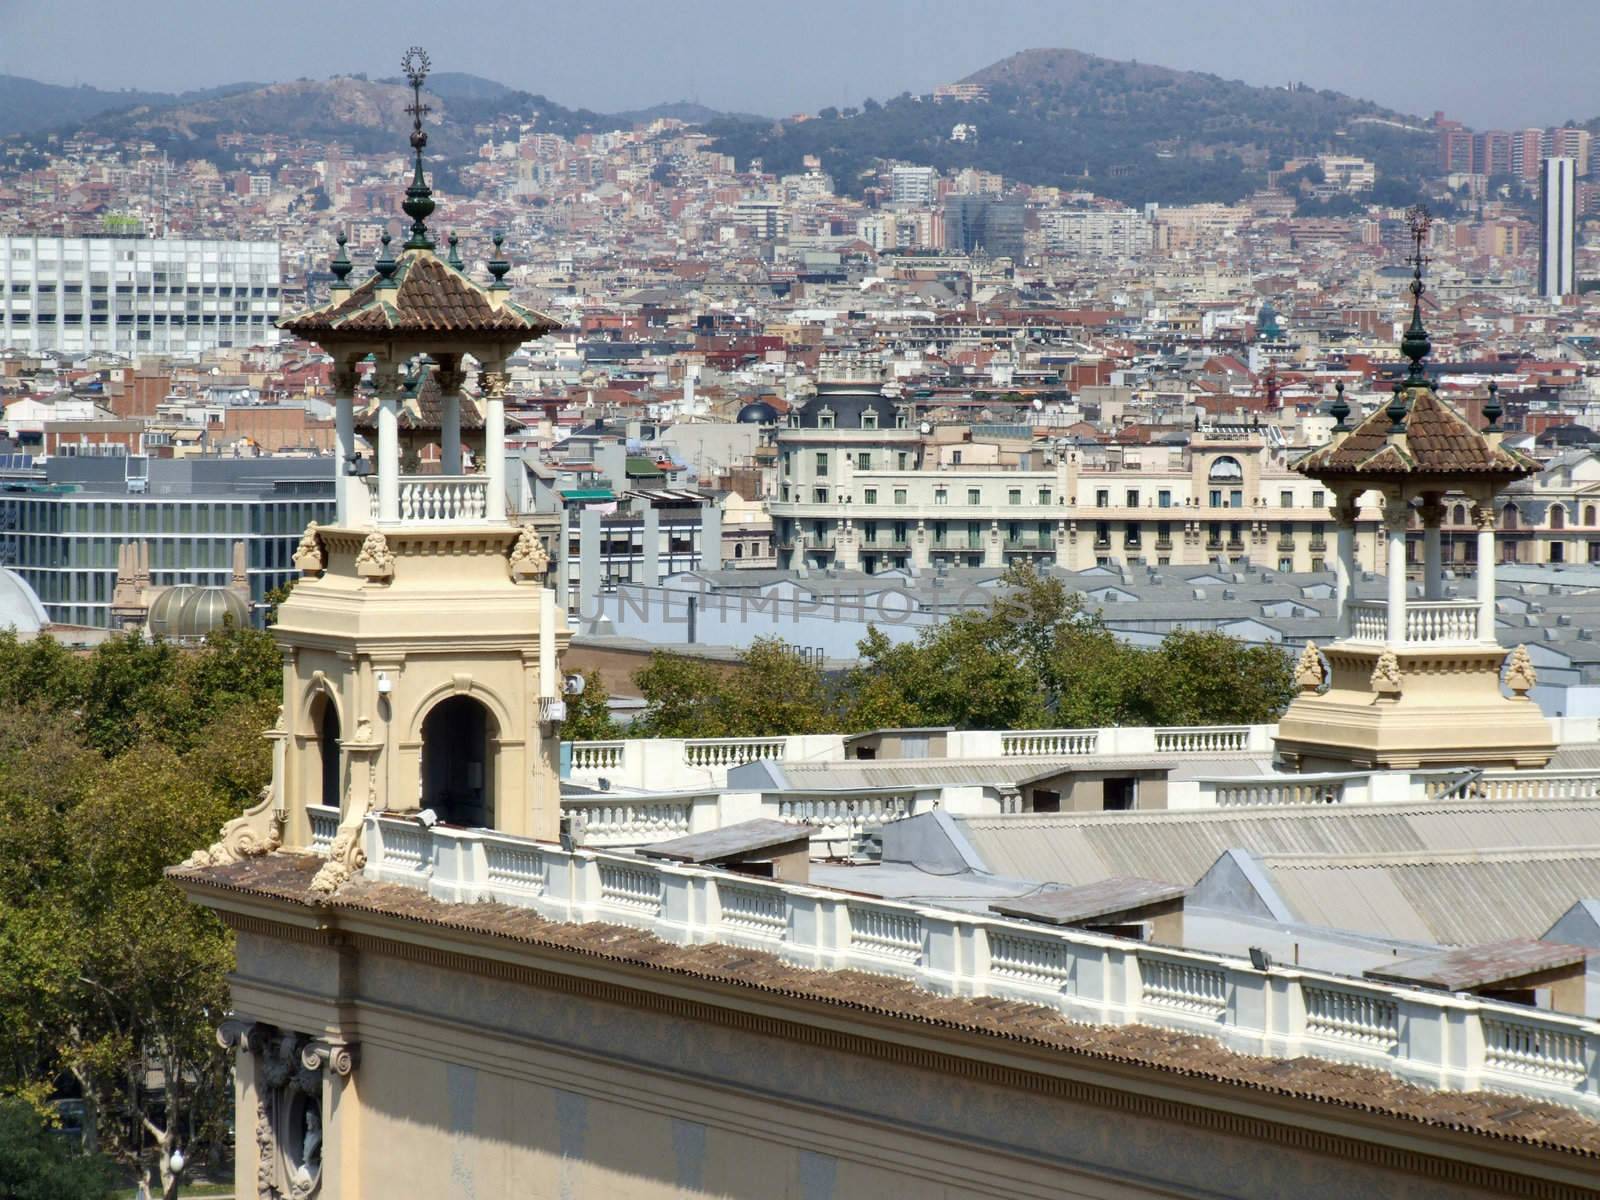 Barcelona landmark. In the foreground - towers of Palau Nacional, background is the cityscape of Catalonia capital city.